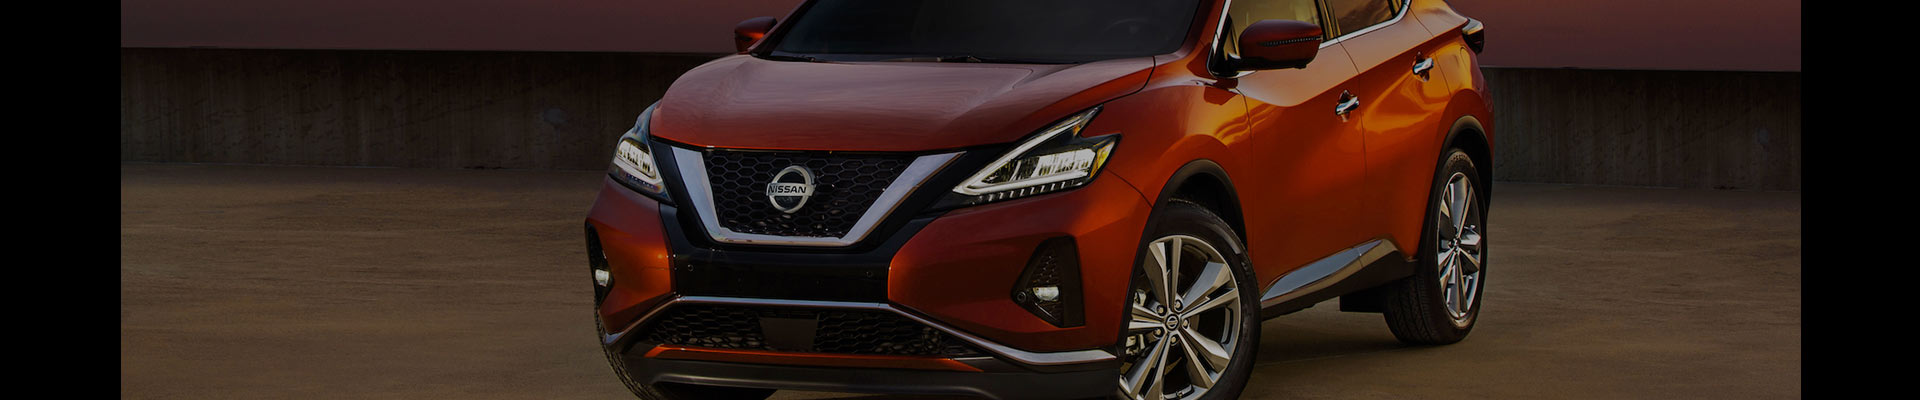 Shop Replacement and OEM 2019 Nissan Murano Parts with Discounted Price on the Net